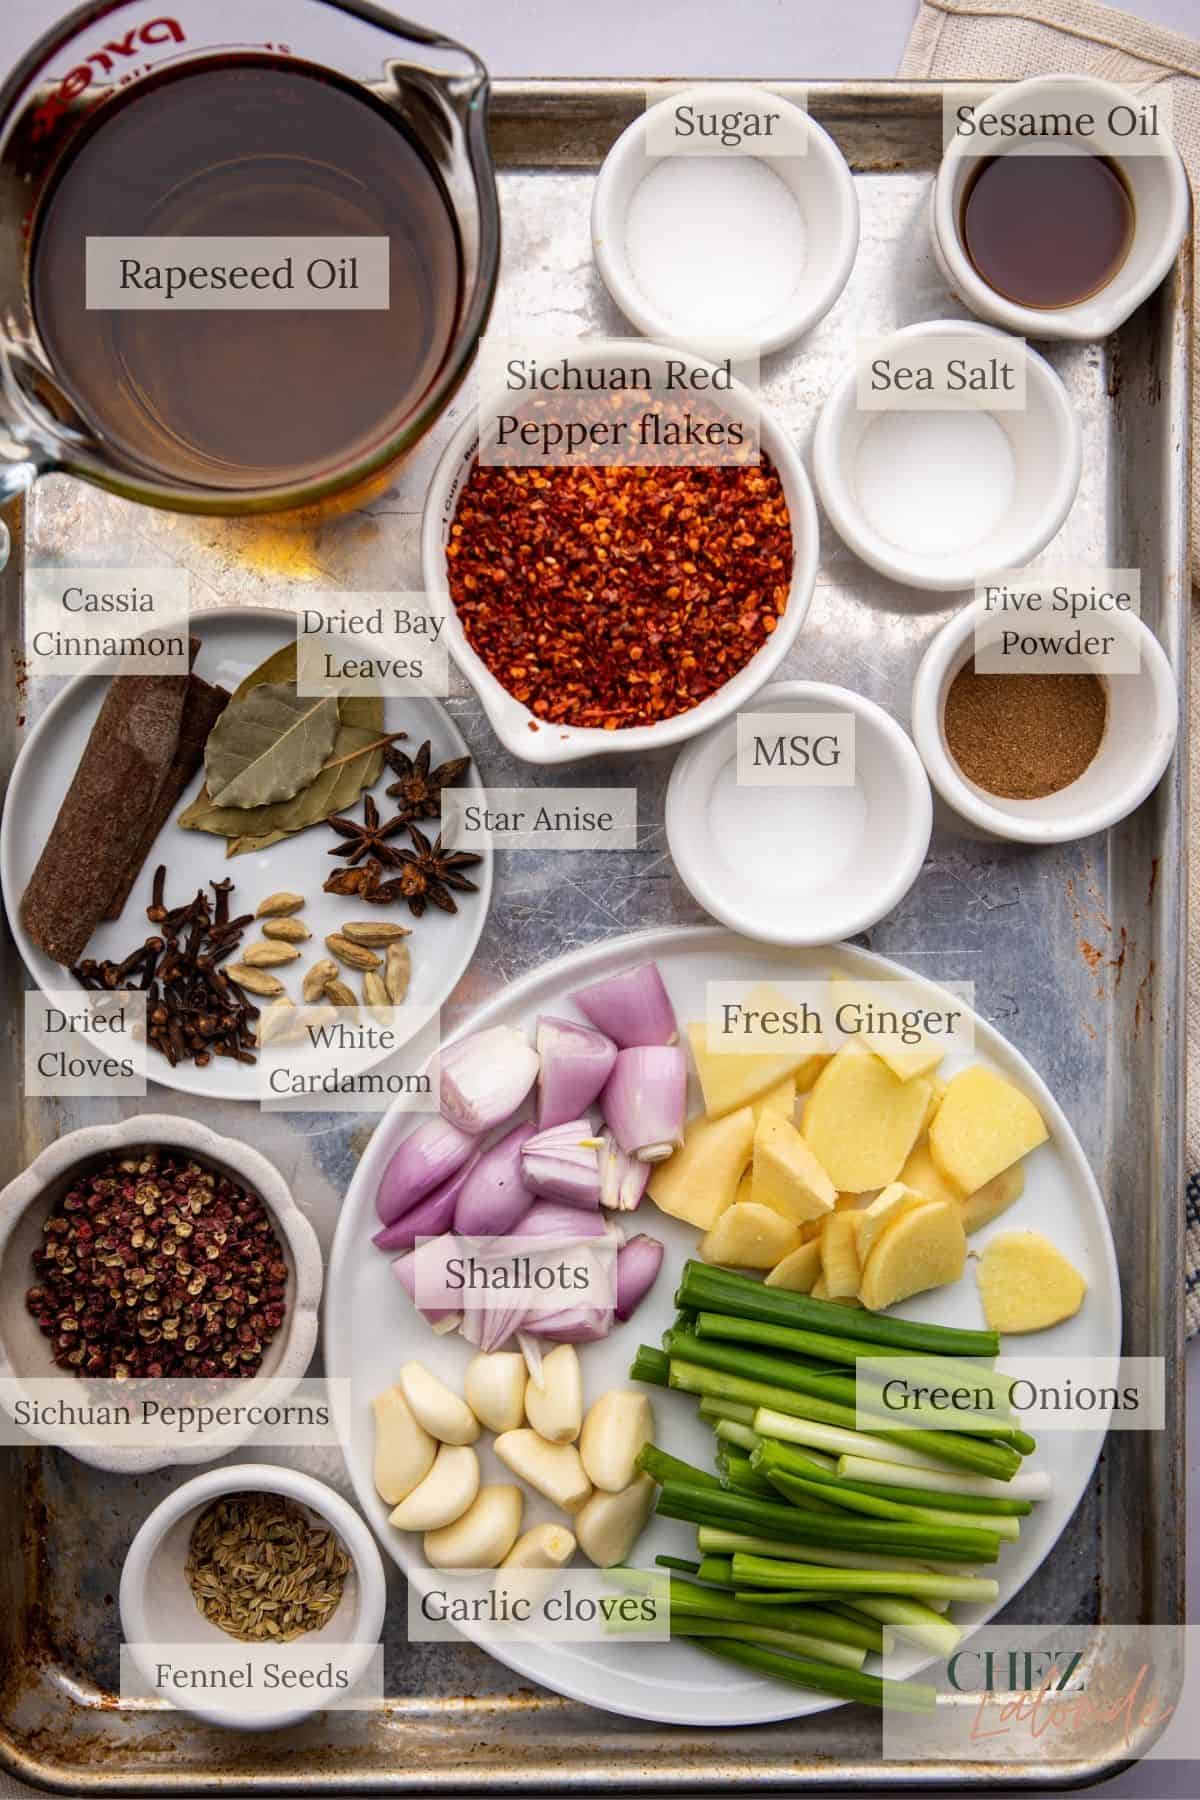 All ingredients needed for making Homemade chinese Chili Oil.  You will need Rapeseed oil, Green onion, ginger, garlic, shallot, cassia cinnamon, Sichuan Peppercorn, Bay leaves, star anise, dried cloves, white cardamom, fennel seeds, sichuan red pepper flakes, sugar, sea salt, toasted sesame oil, five spice powder, and MSG. 